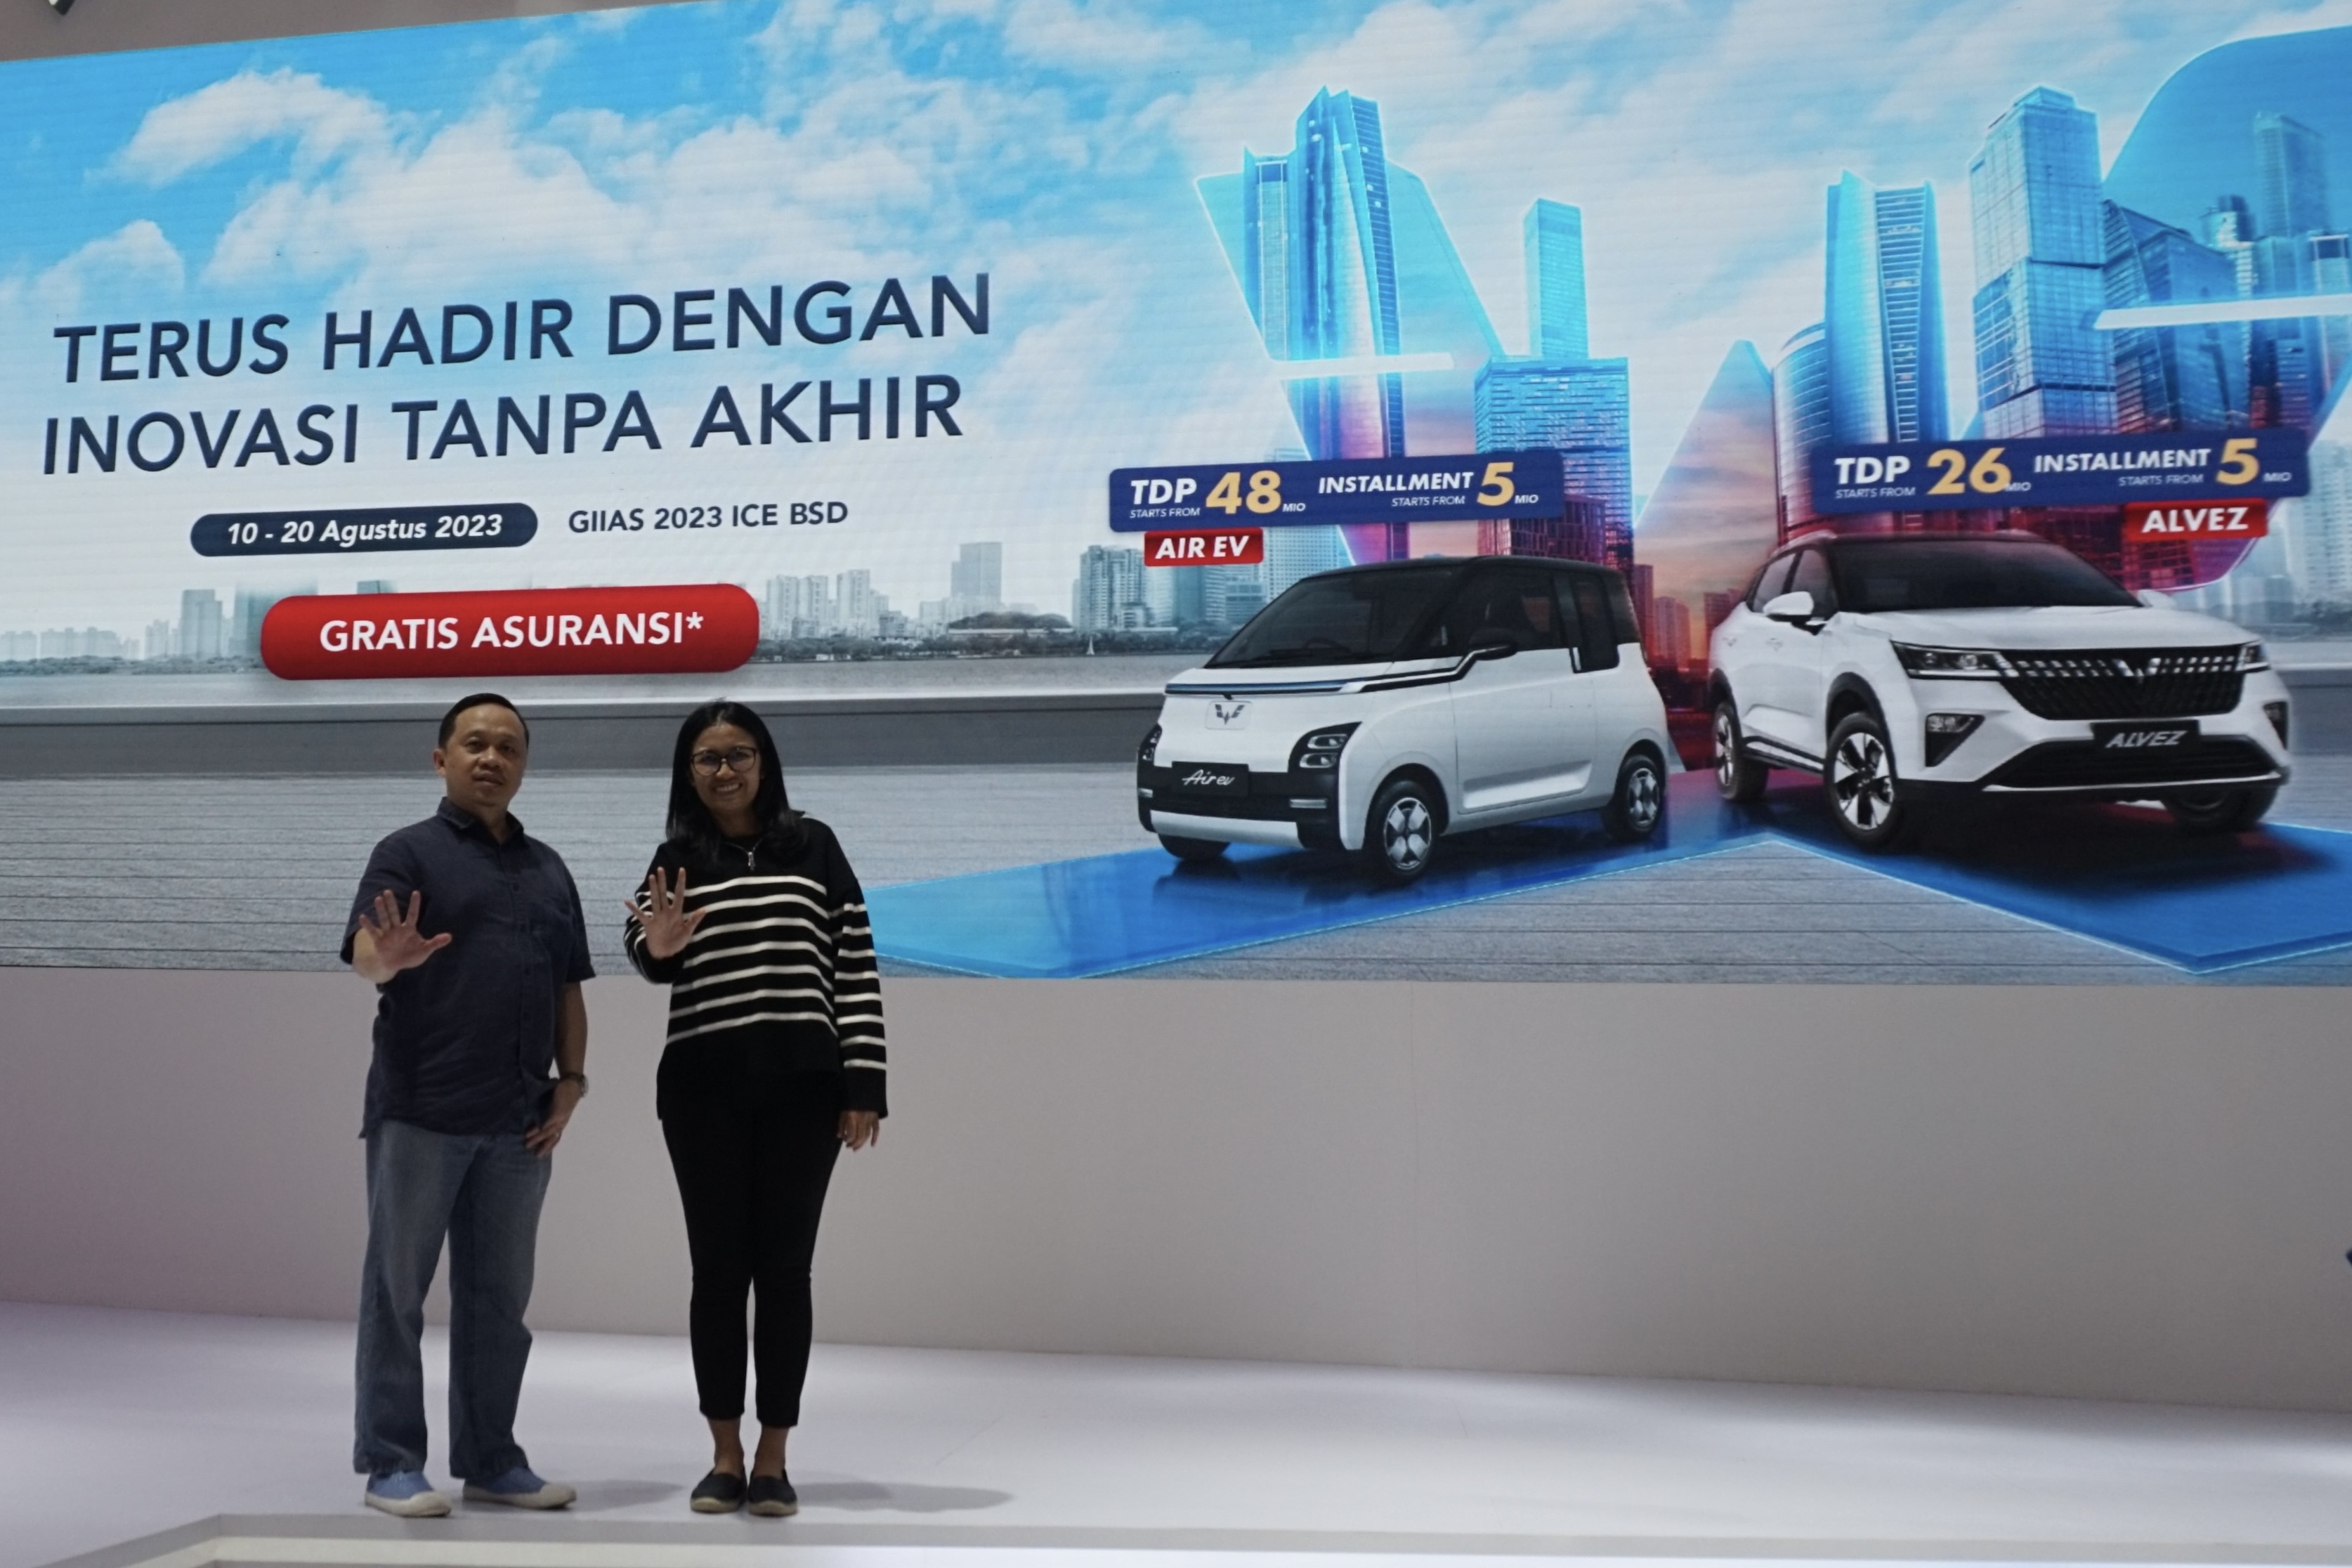 Image Wuling Finance Offers Special Promo for Alvez & Air ev Purchase at GIIAS